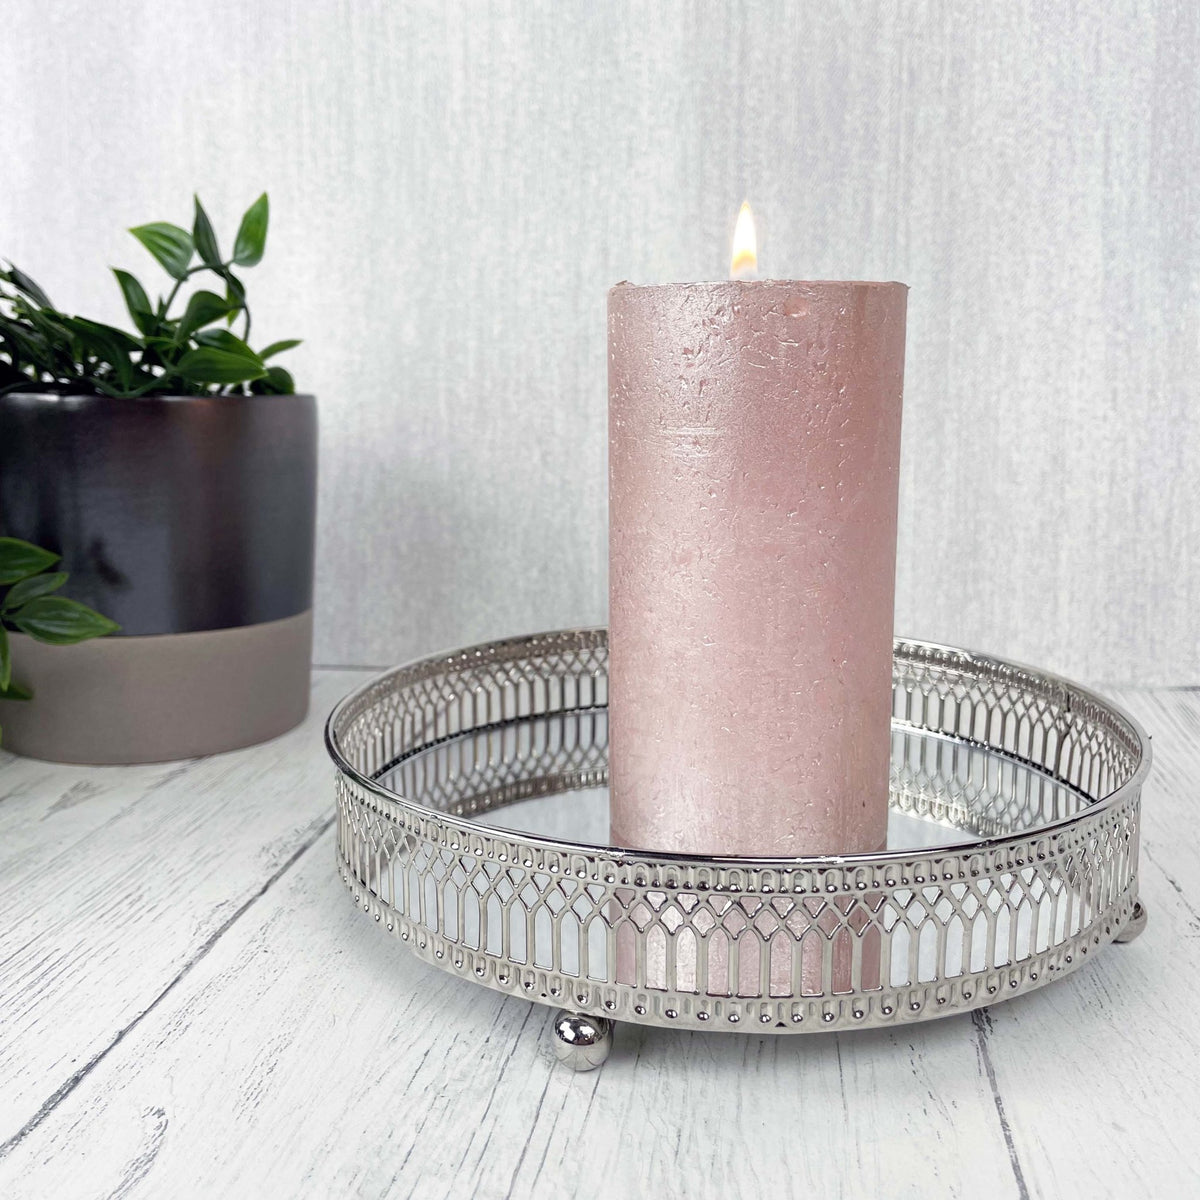 Regiis Silver Style Mirror Tray with pink candle and planter